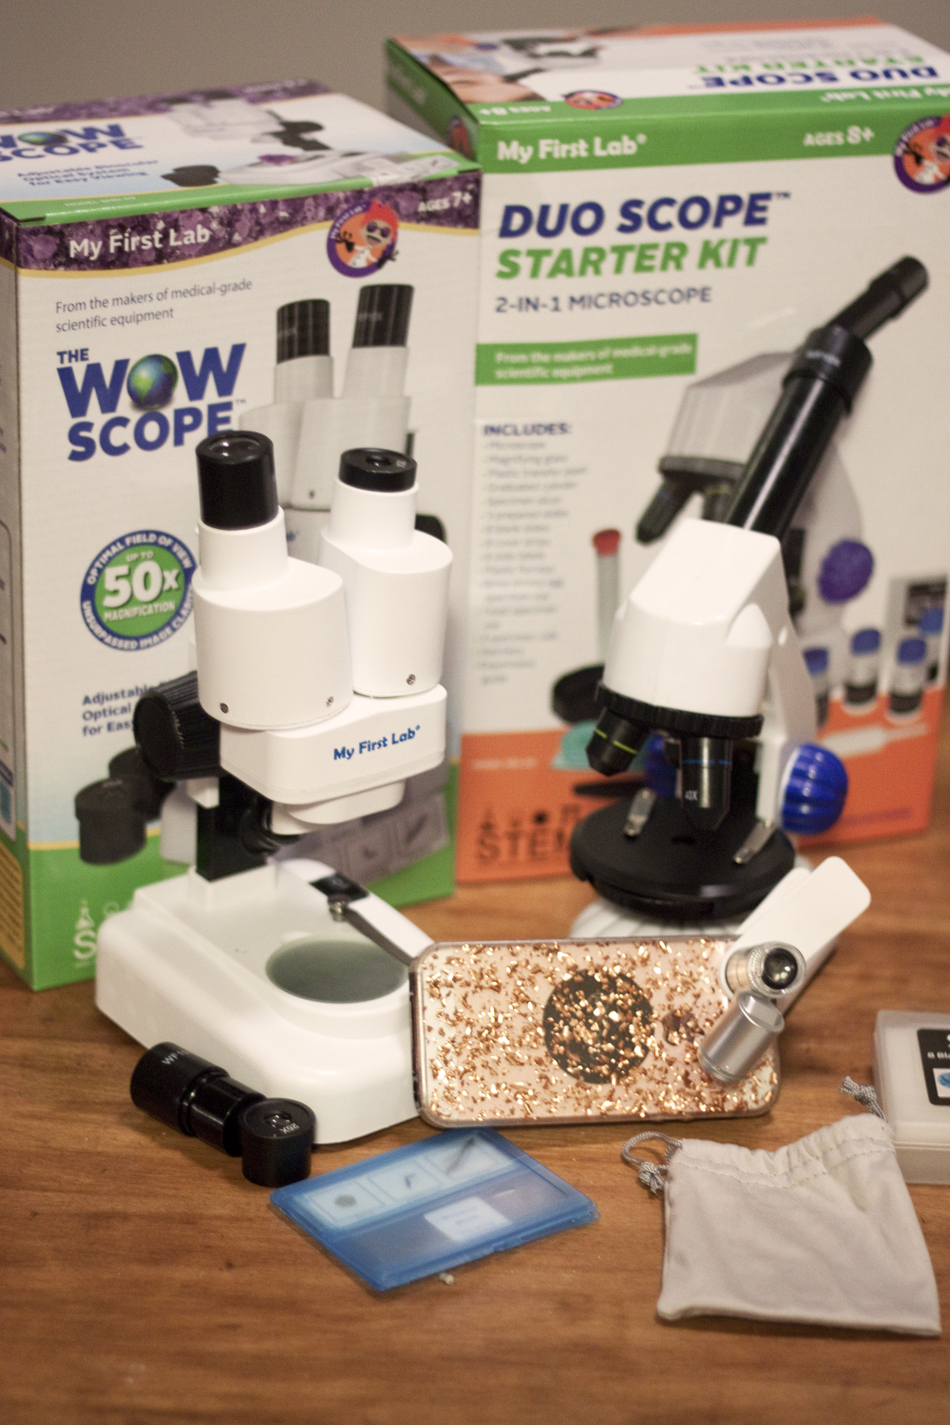 My First Lab Microscope WOW Scope Duo Scope Smartphone Inspector